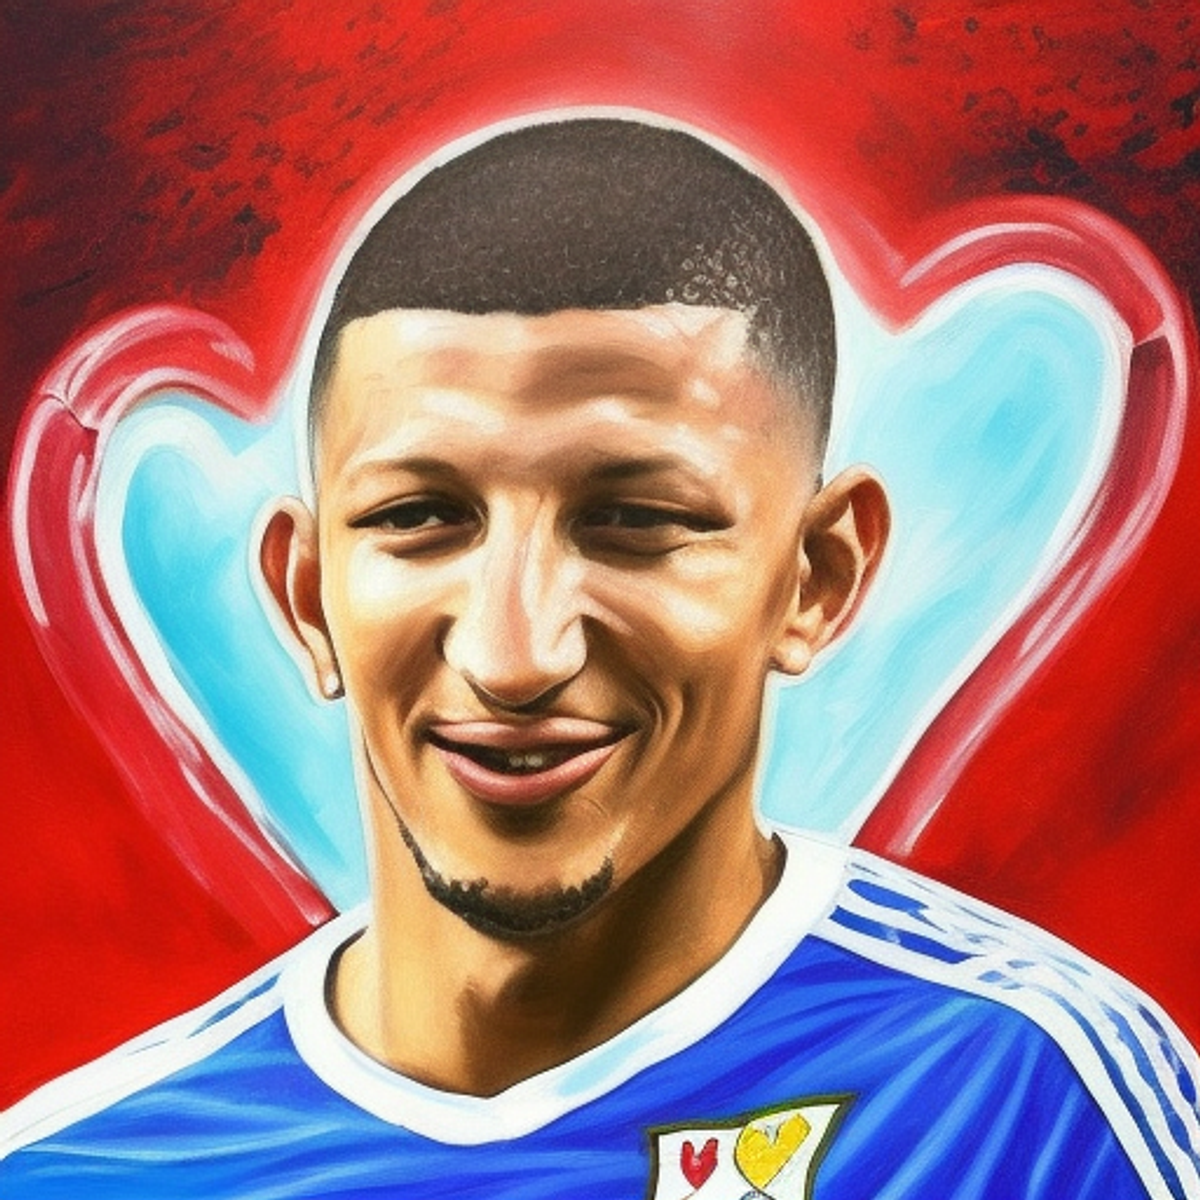 Richarlison with a Big Heart, Painting